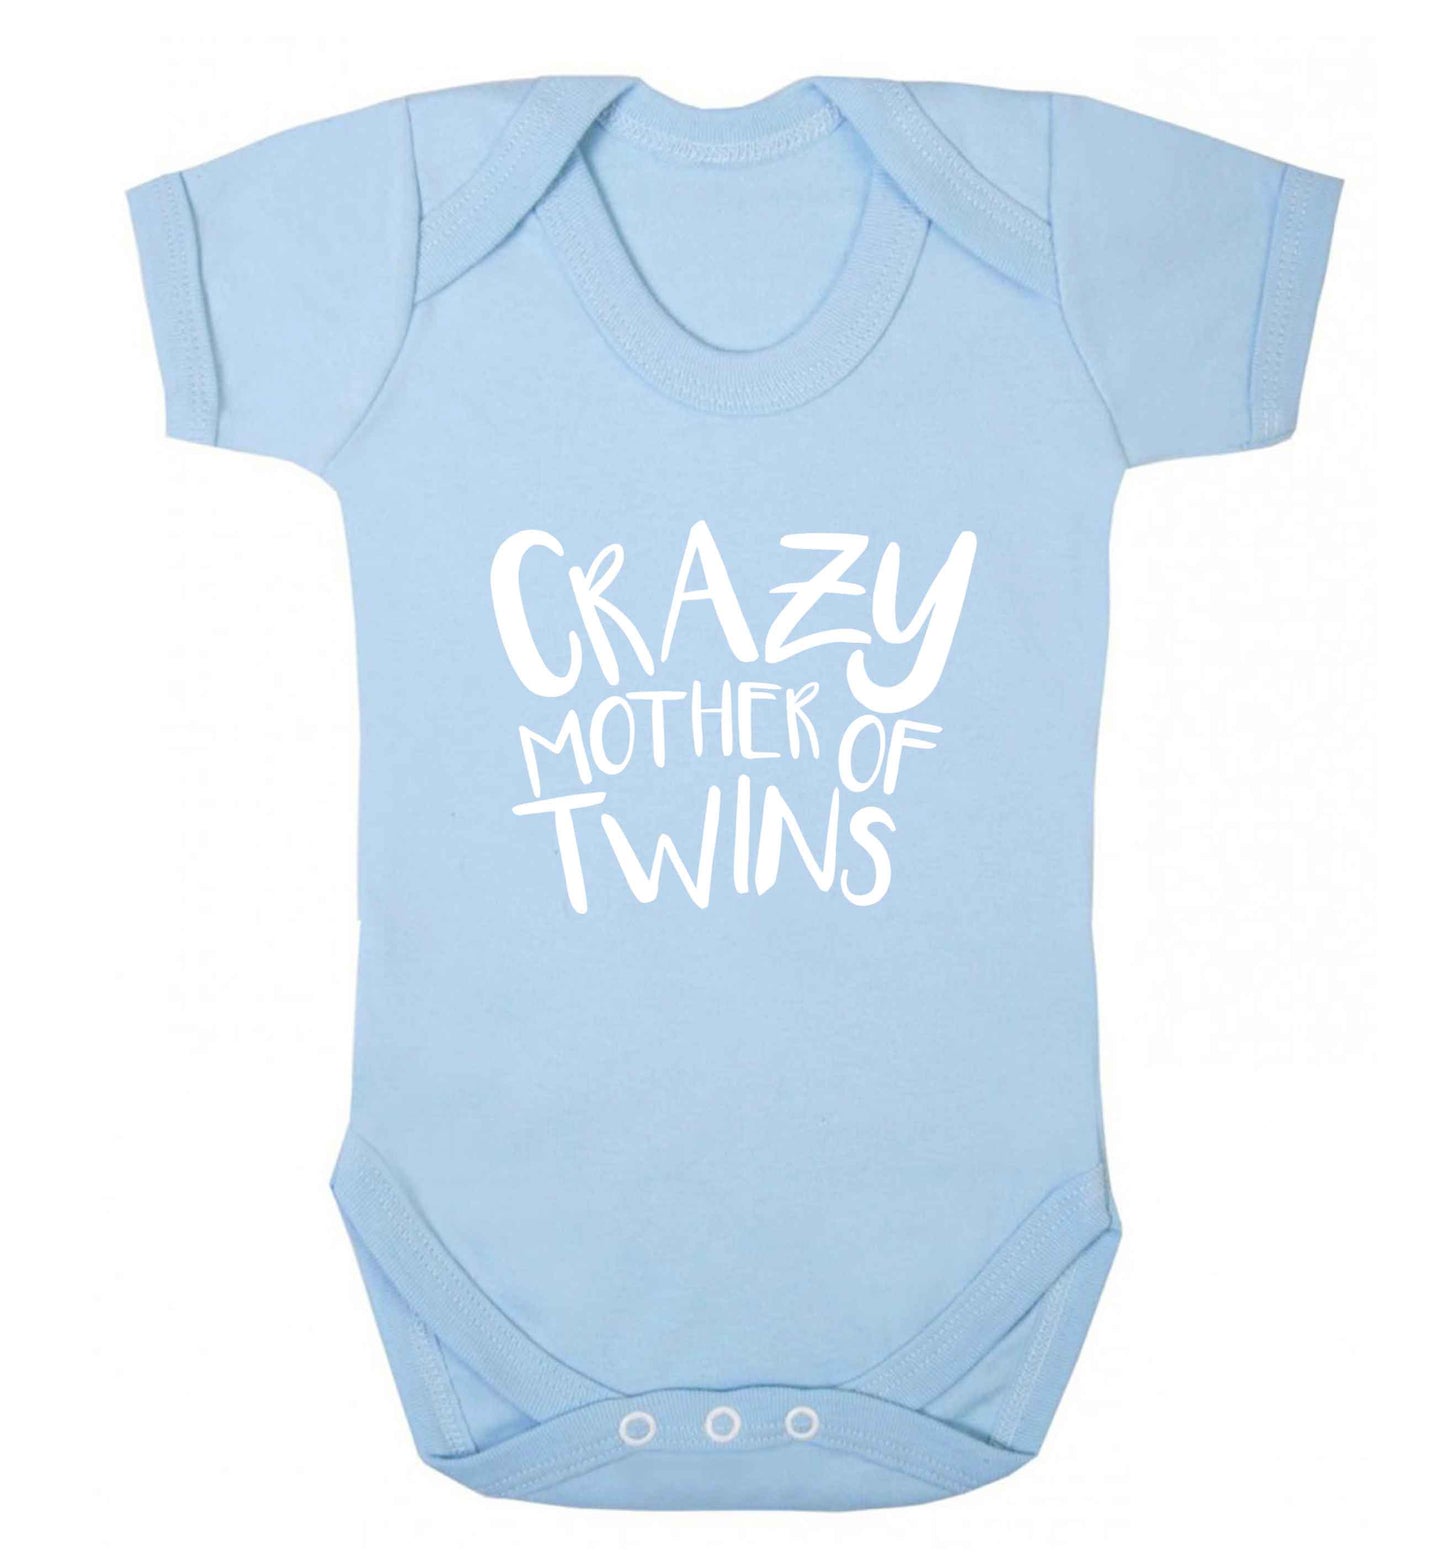 Crazy mother of twins baby vest pale blue 18-24 months